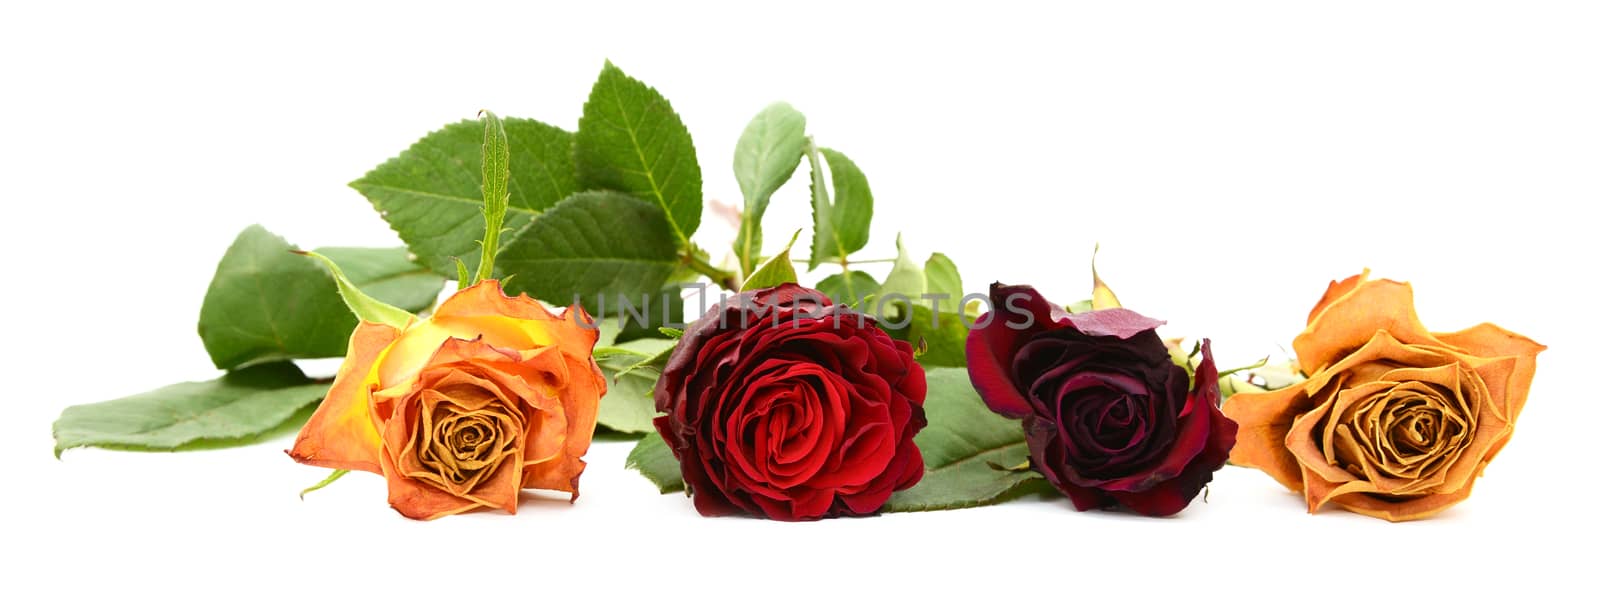 Row of four fading rose blooms in yellow, red, burgundy and orange, isolated on a white background